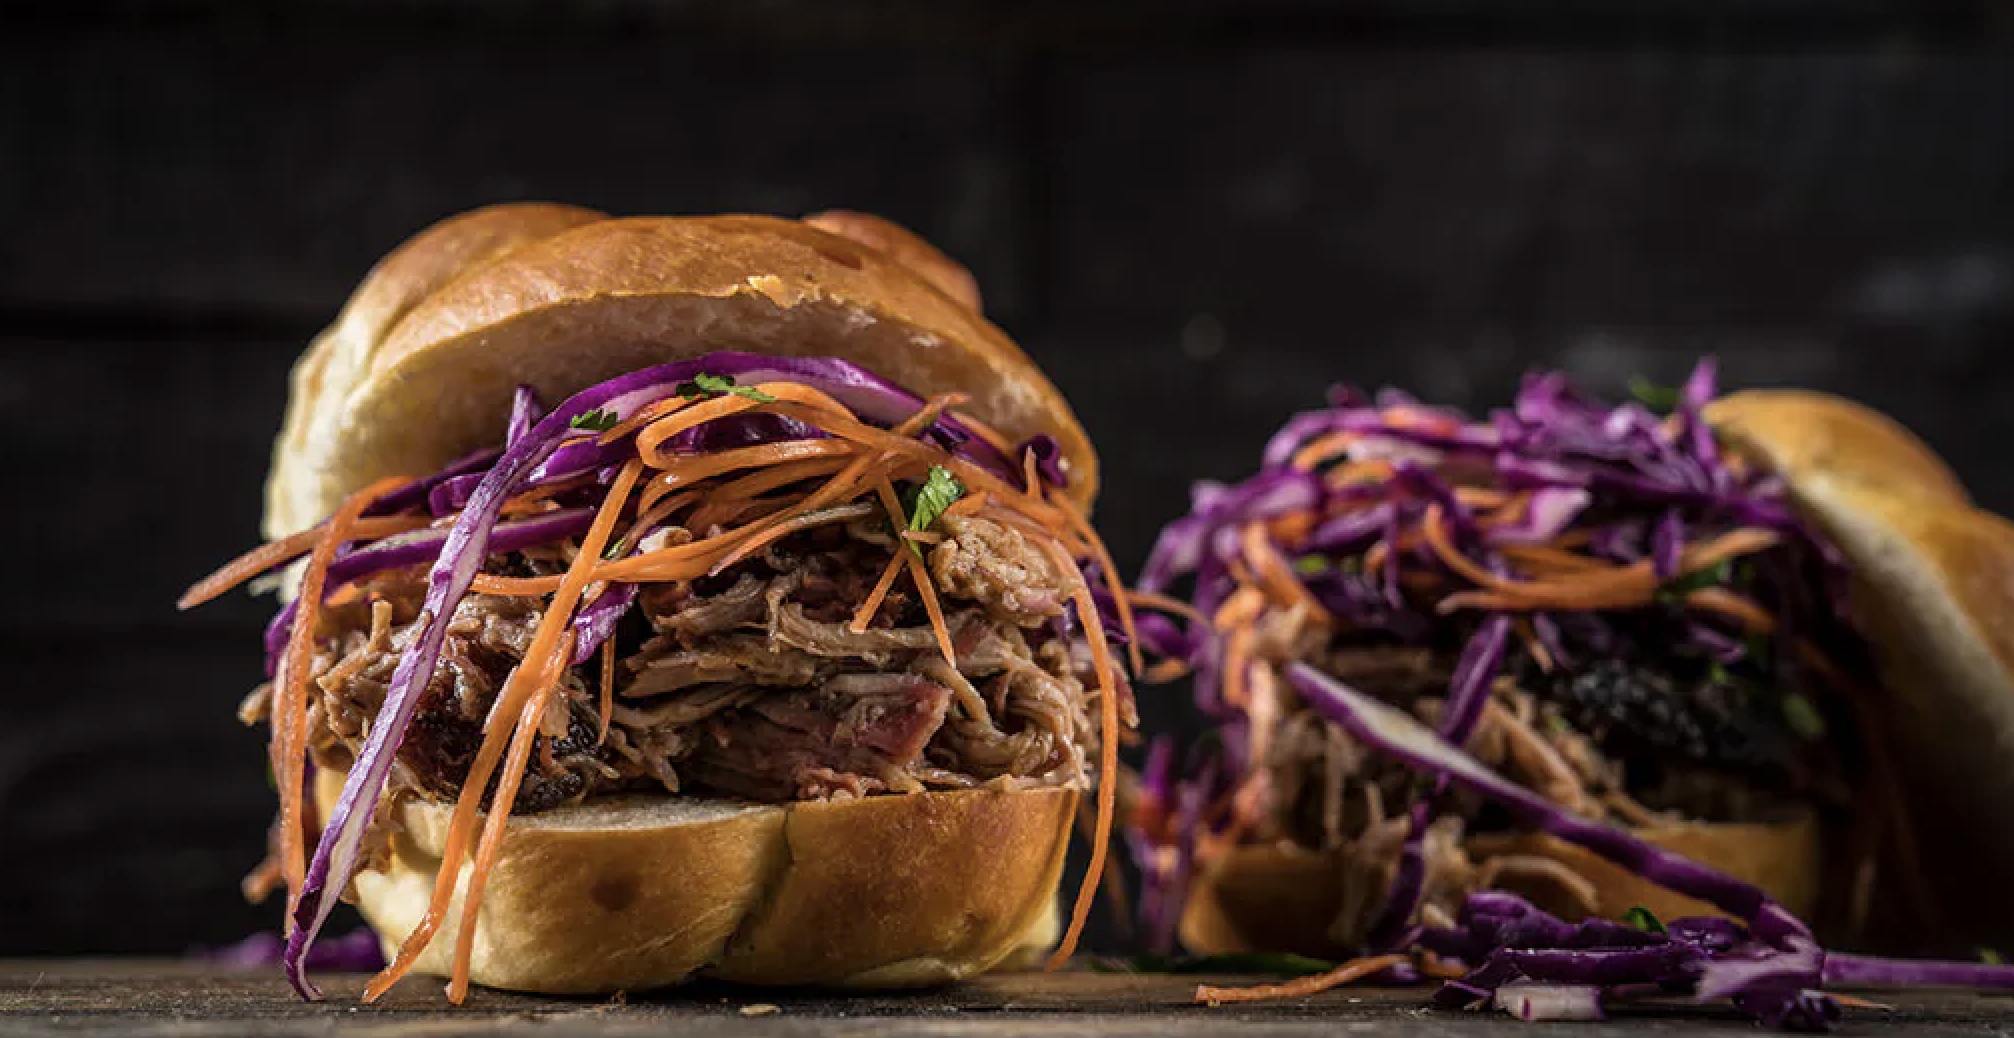 Traeger Grill Special: Smoked Carolina Pulled Pork Sandwiches